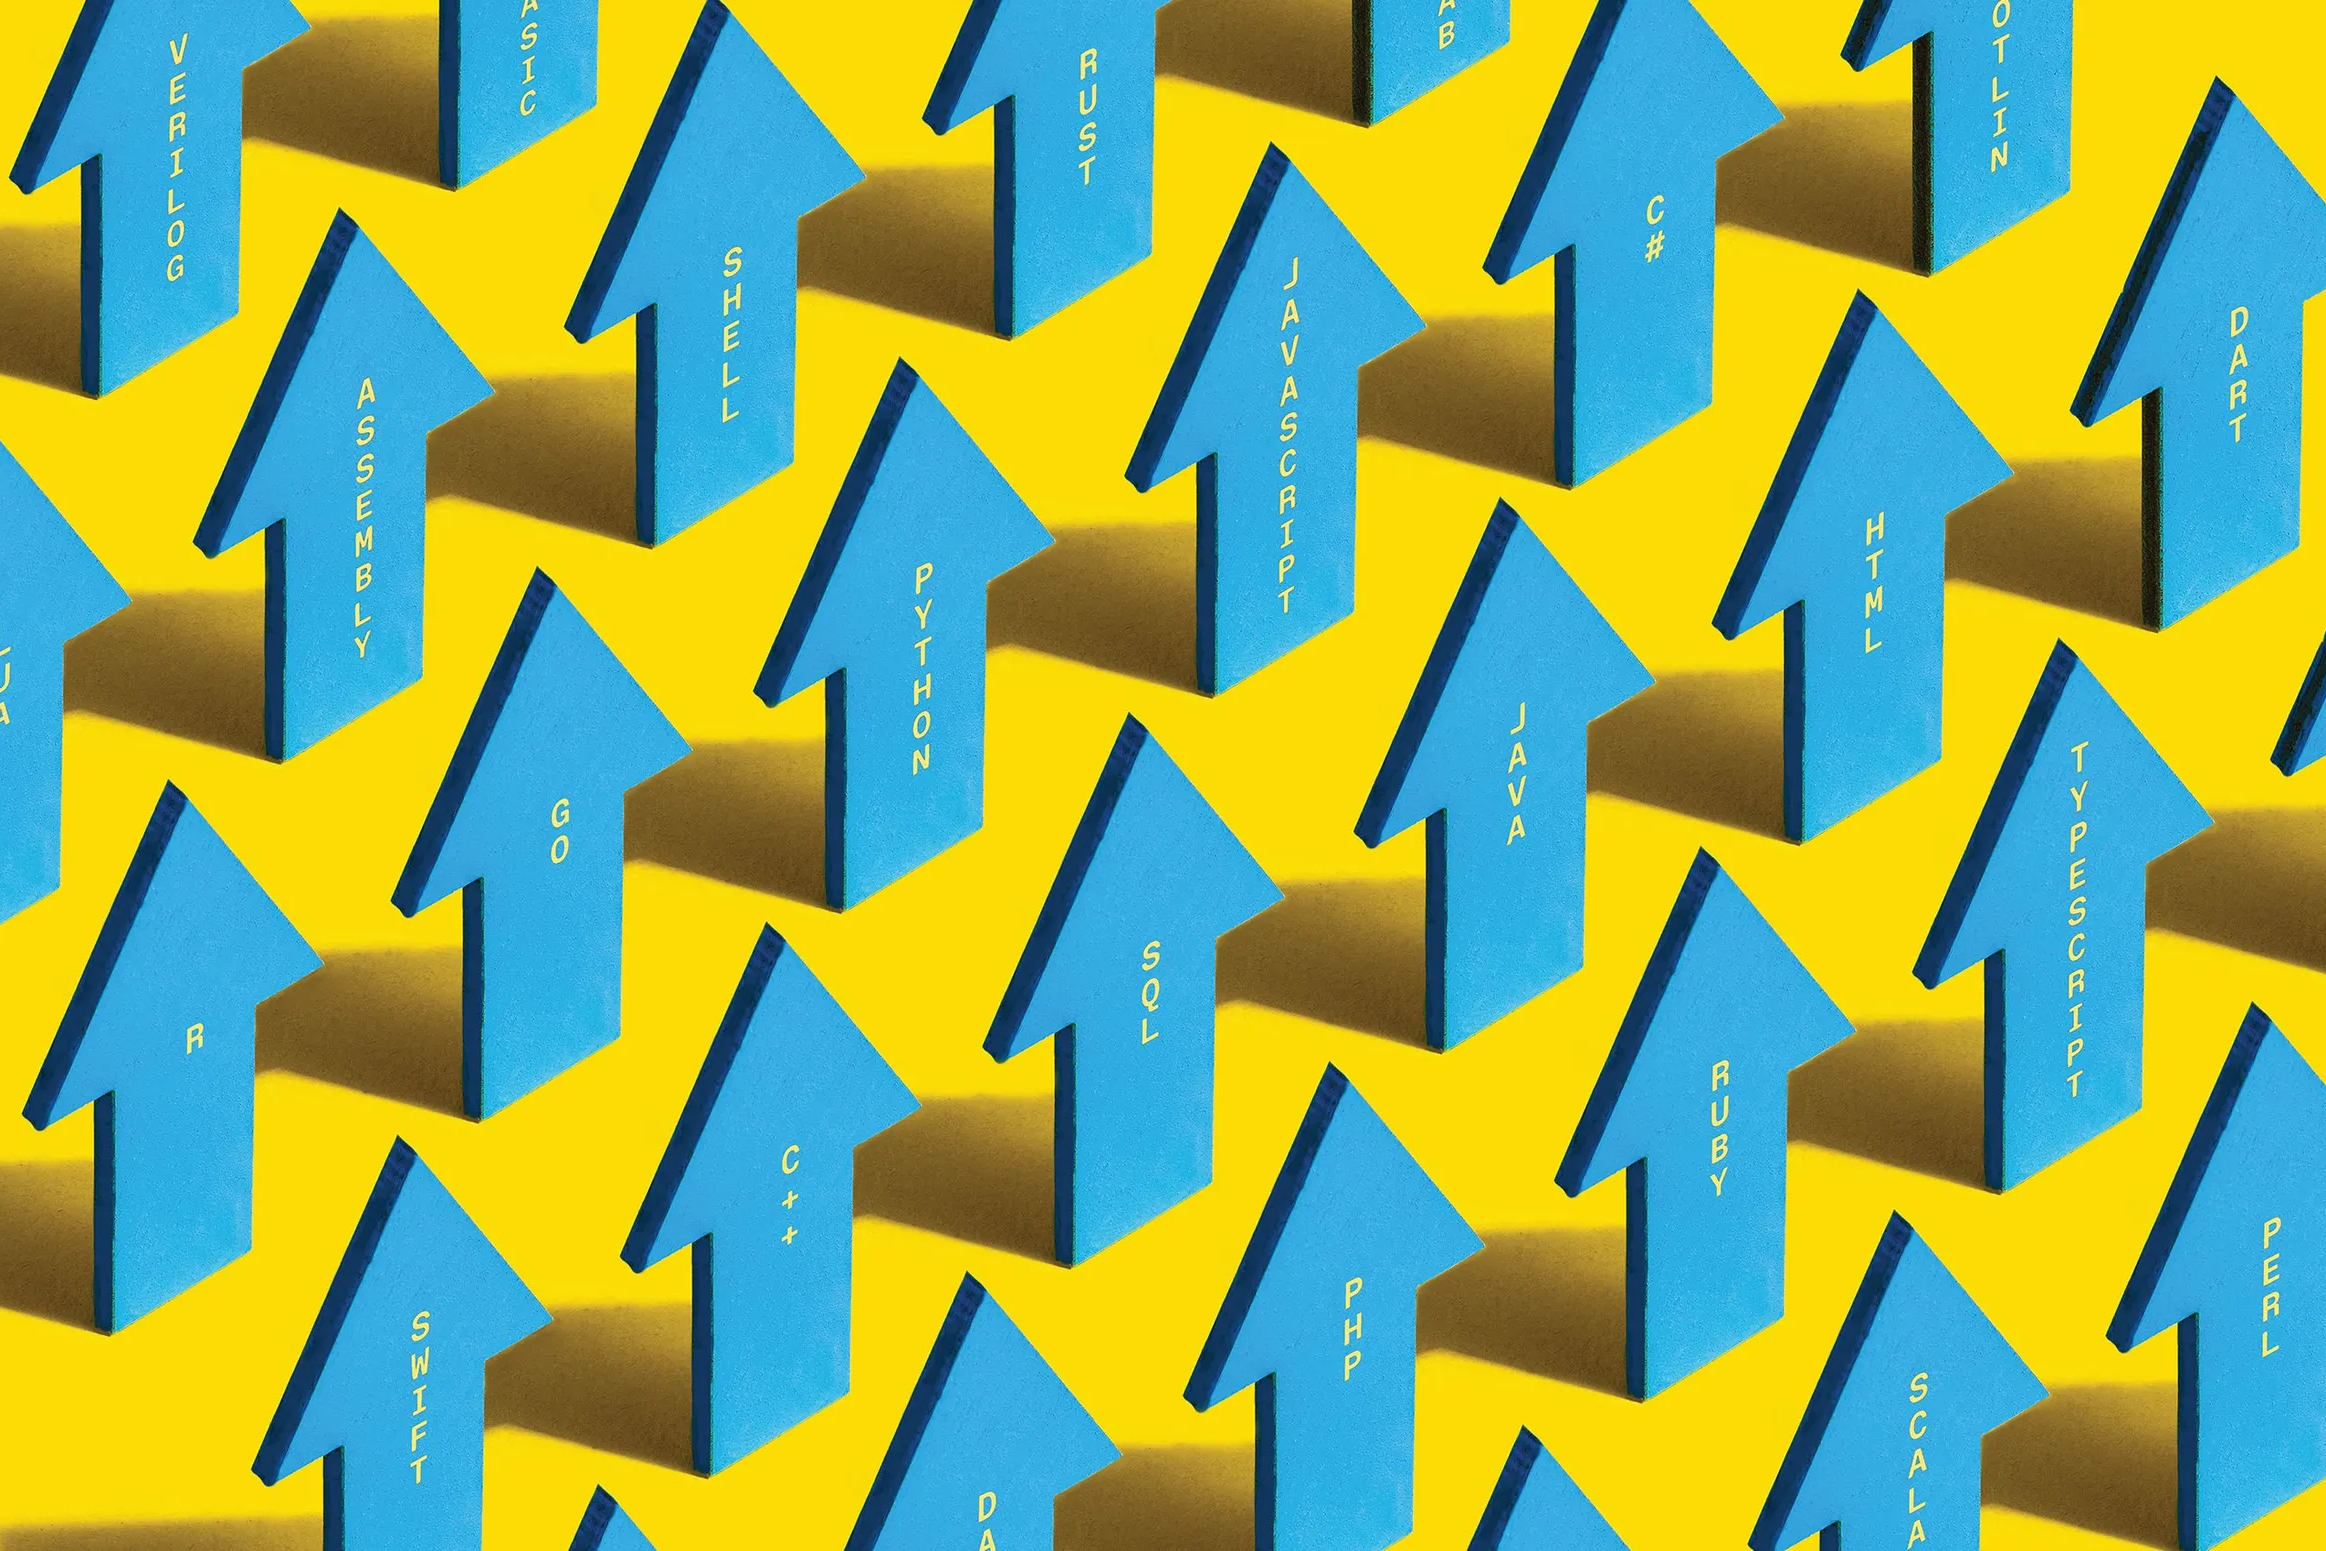 Blue arrows pointing up on a yellow background, with names of computer languages on them.